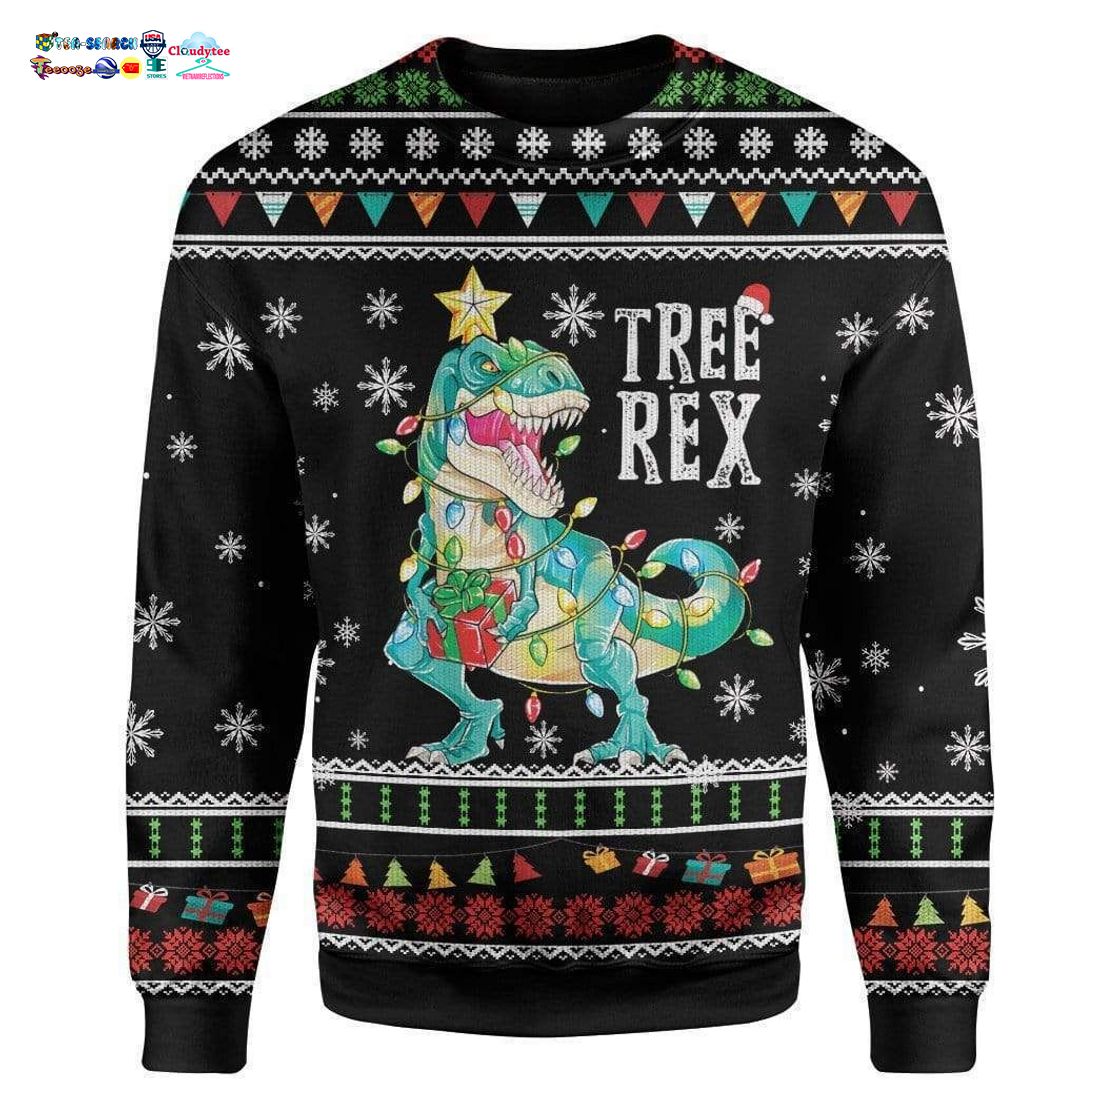 Tree Rex Ver 2 Ugly Christmas Sweater